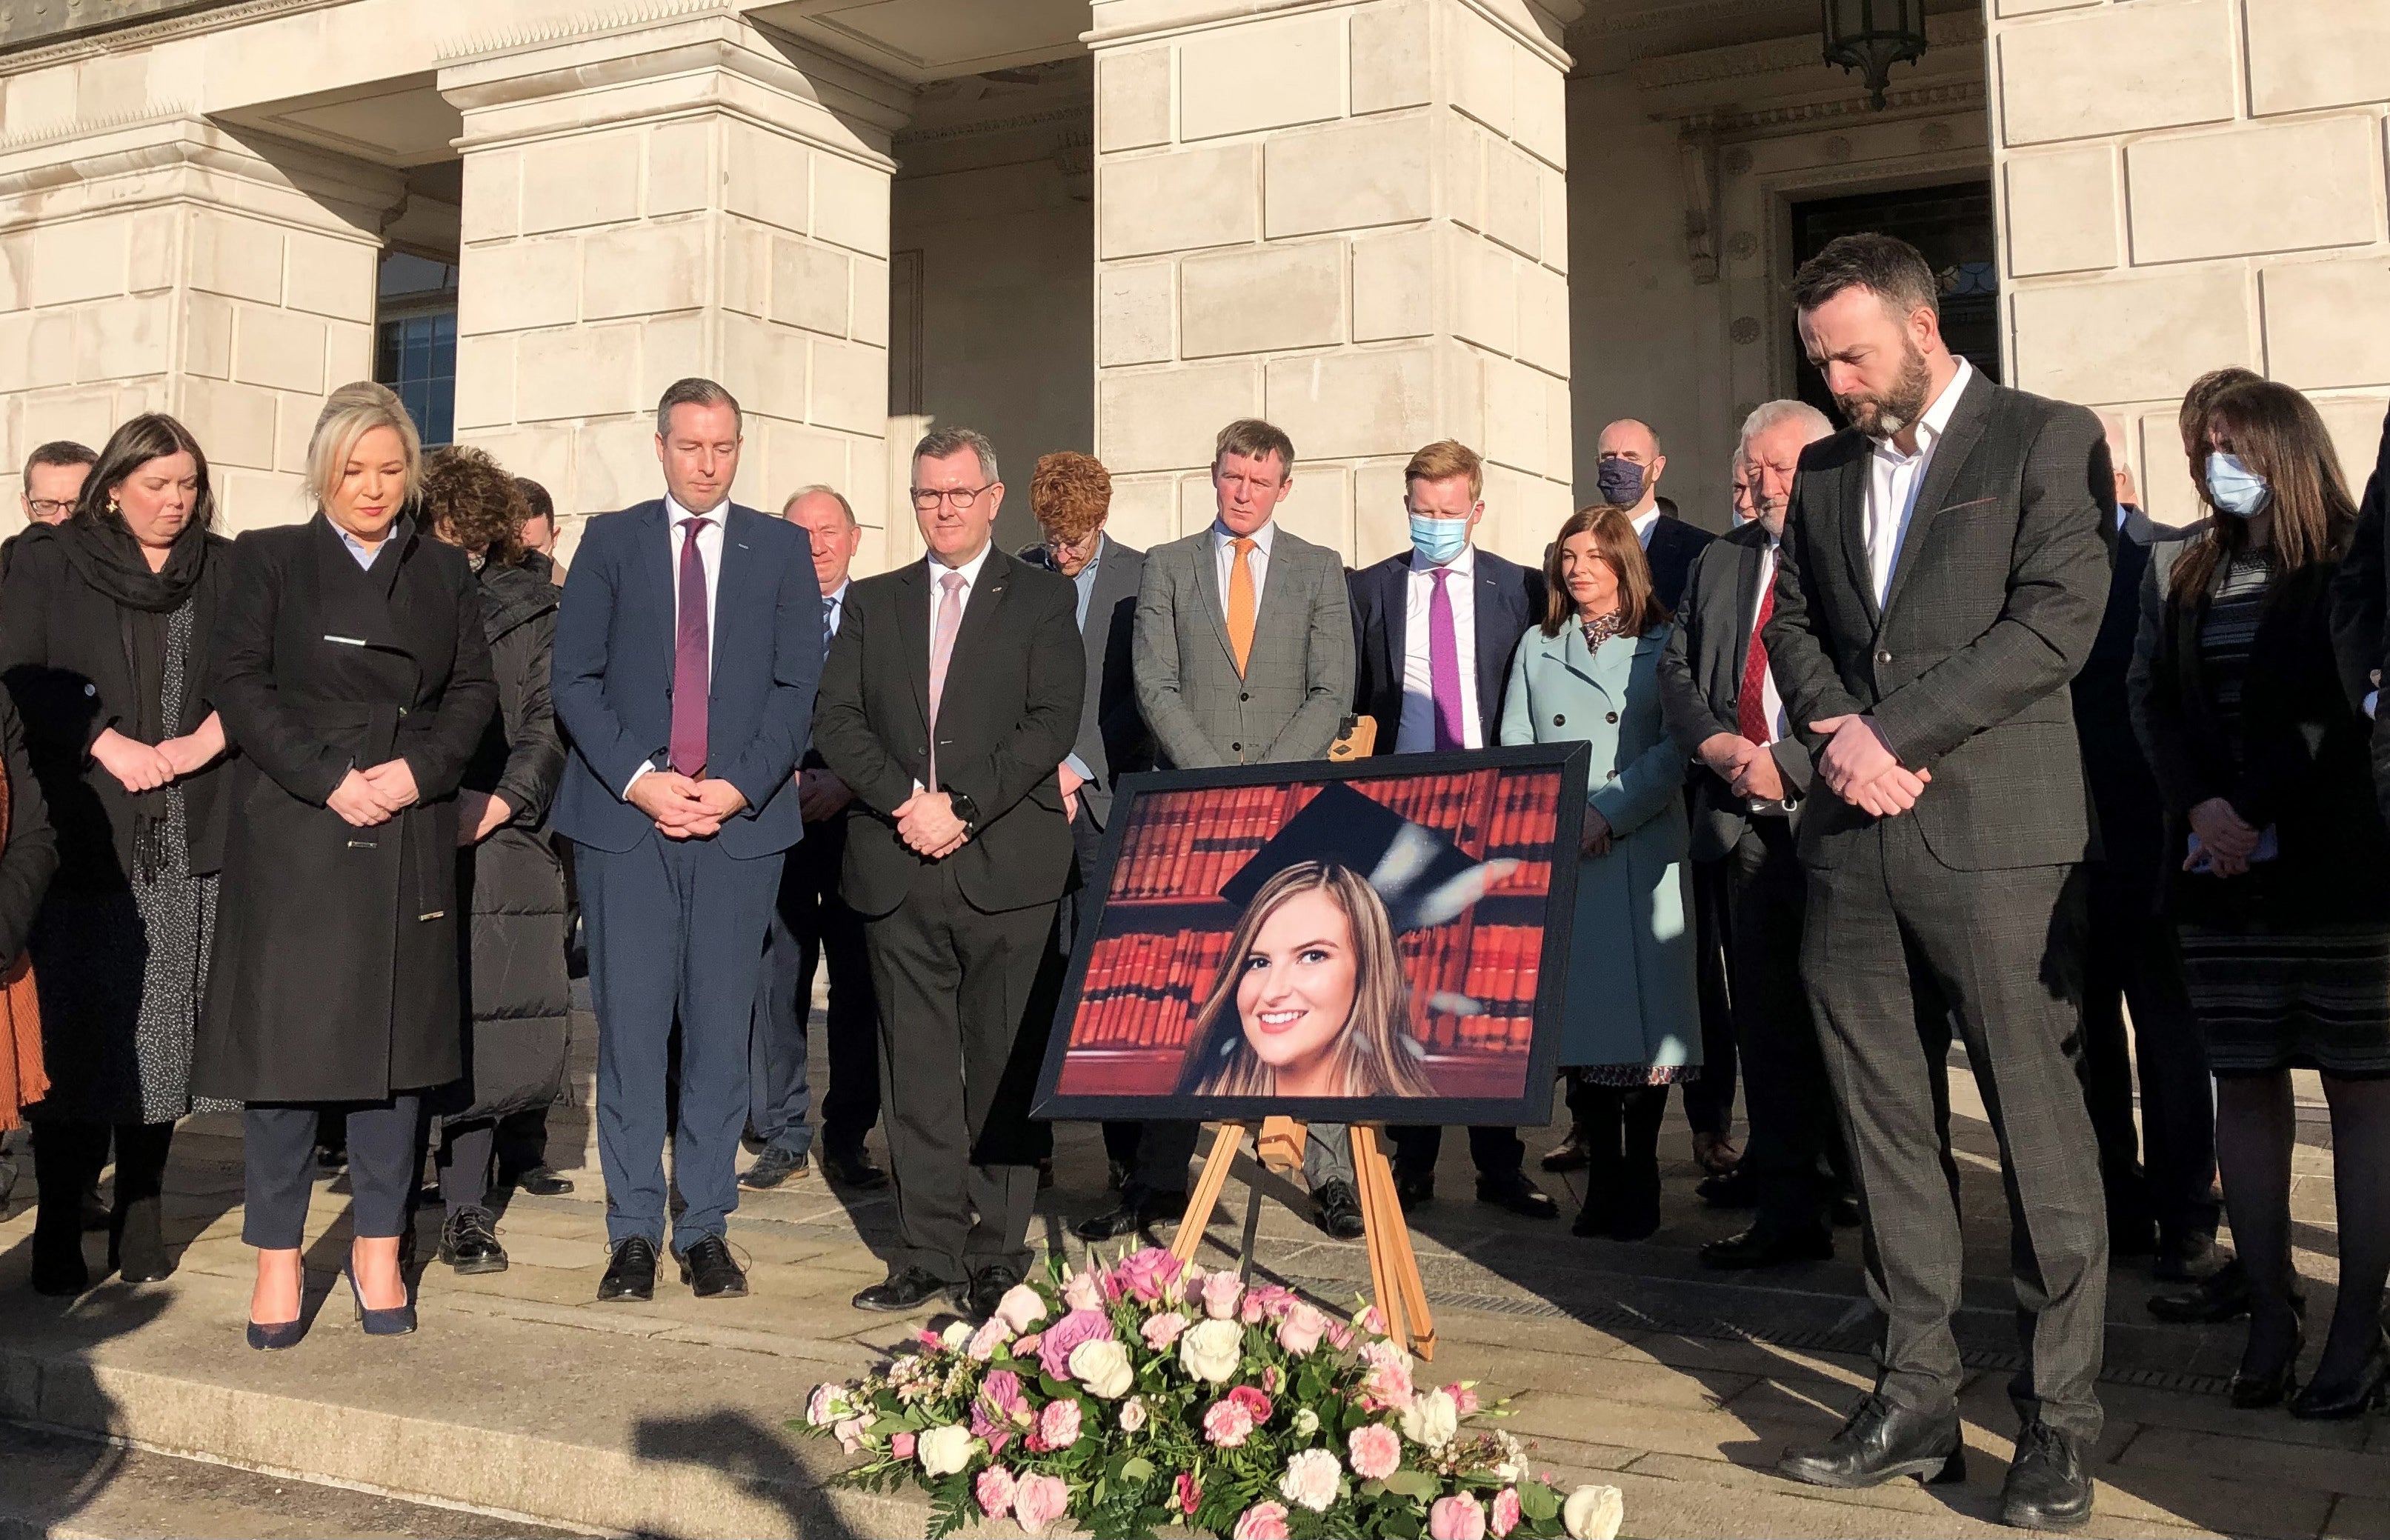 MLAs and MPs take part in a silent vigil on the steps of Parliament Buildings, Stormont, for Ashling Murphy who was found dead after going for a run in Co Offaly (PA)